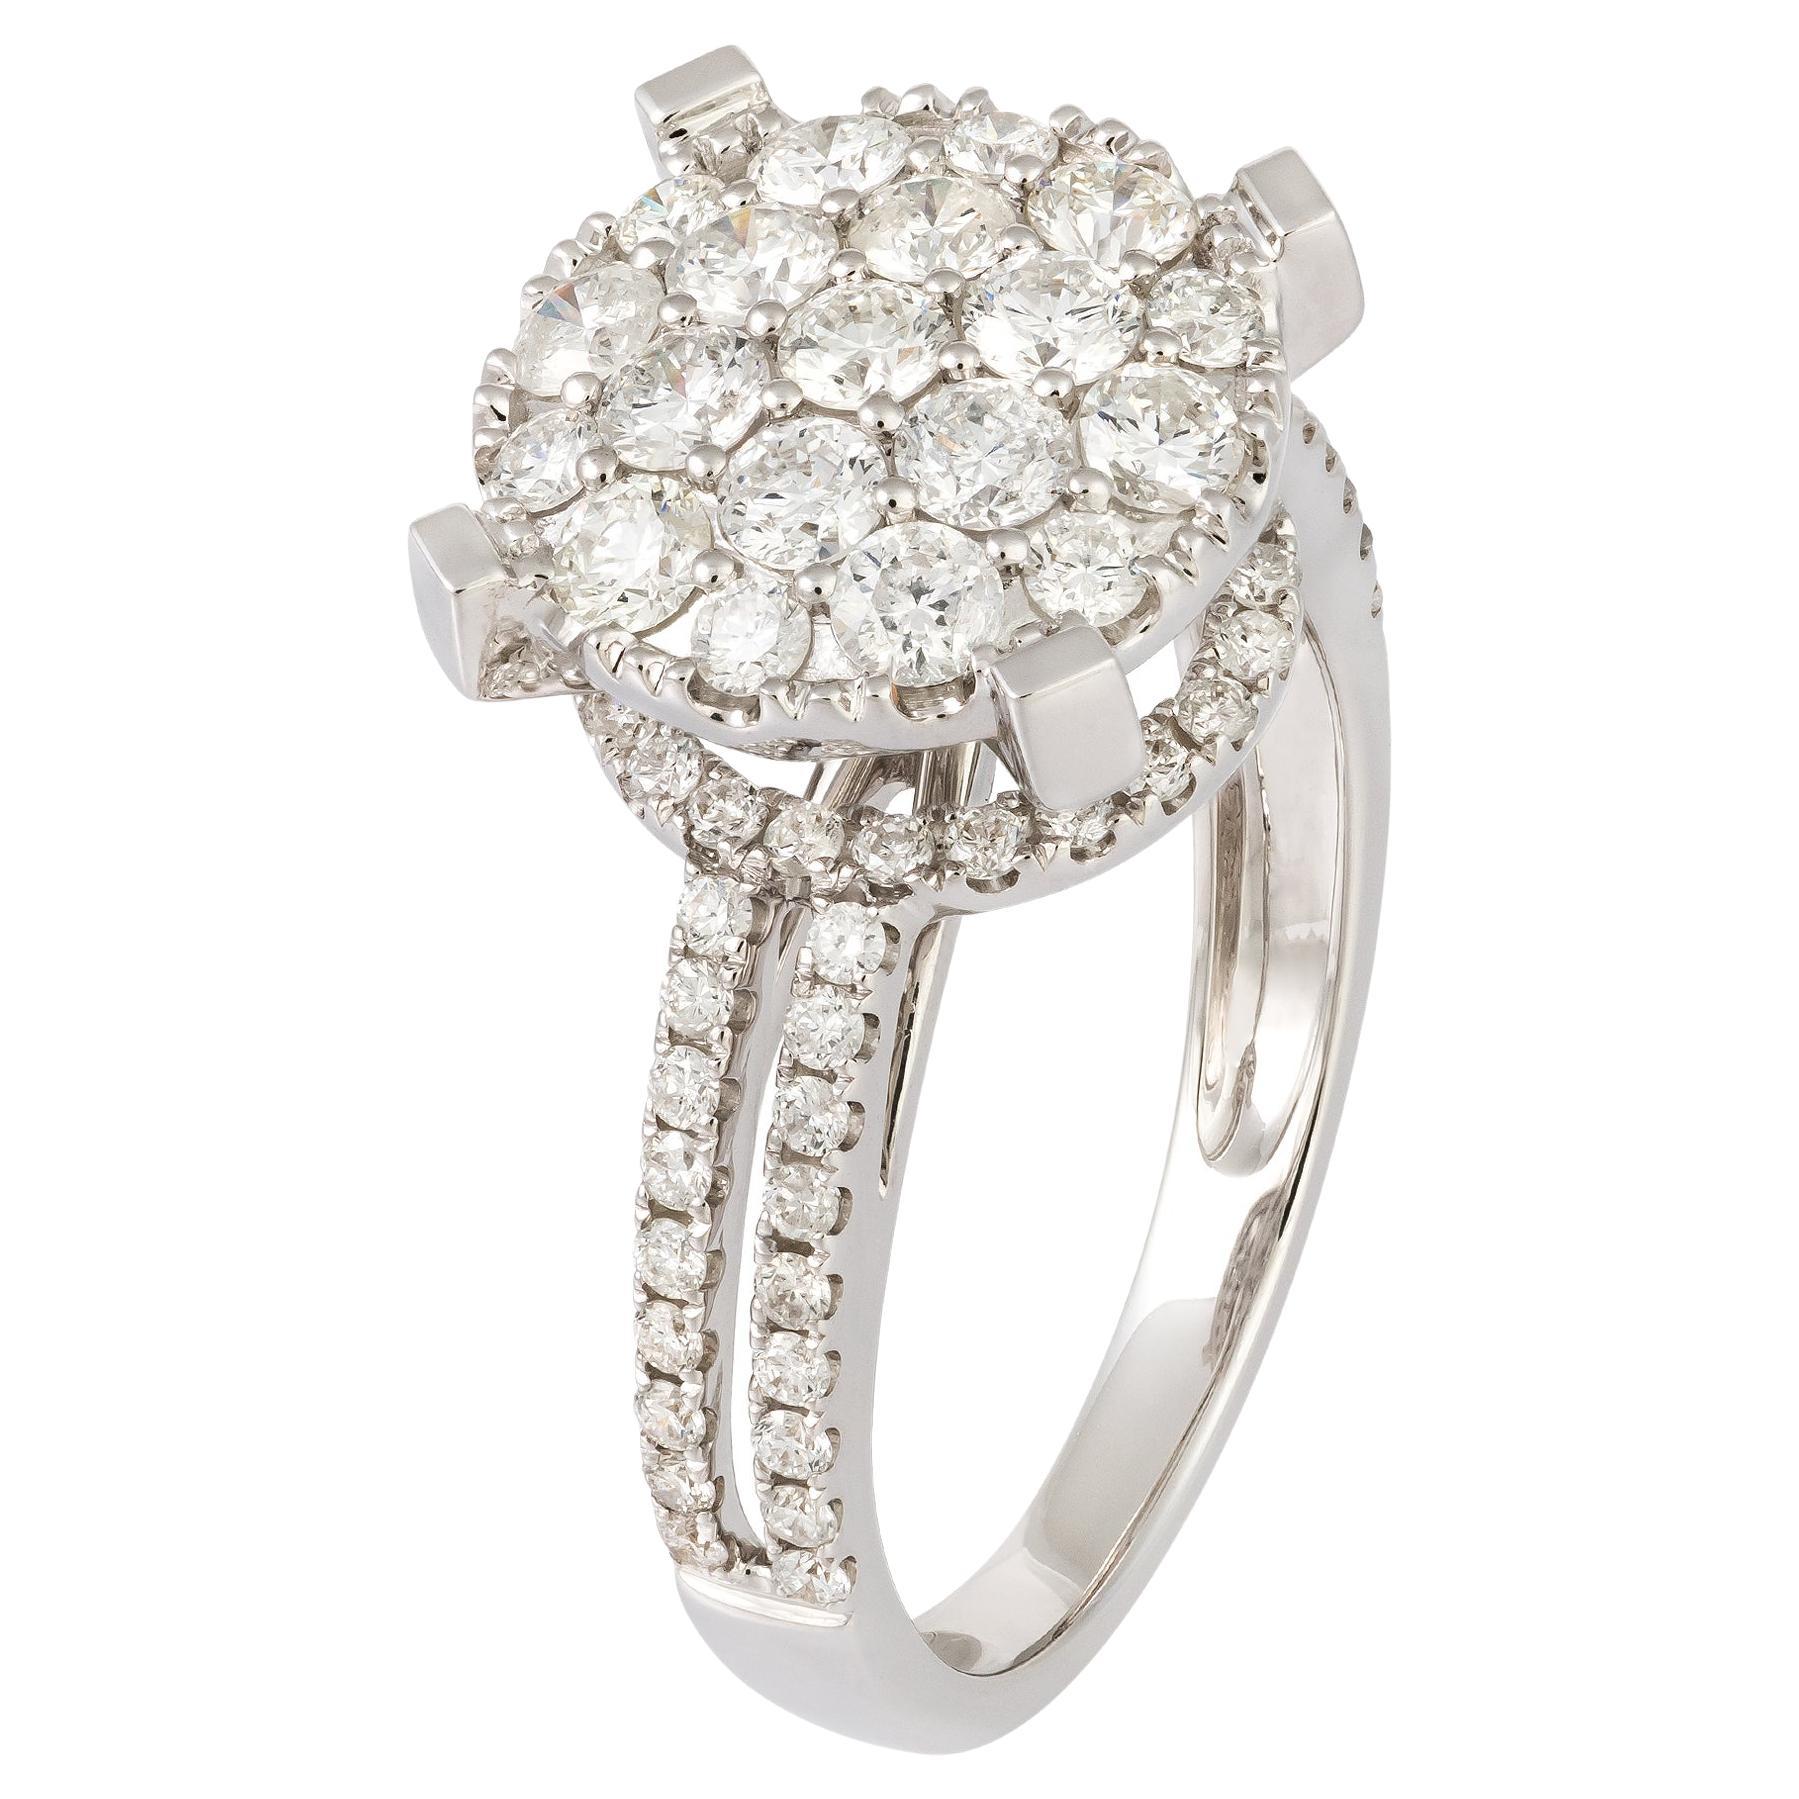 Every Day White 18K Gold White Diamond Ring for Her